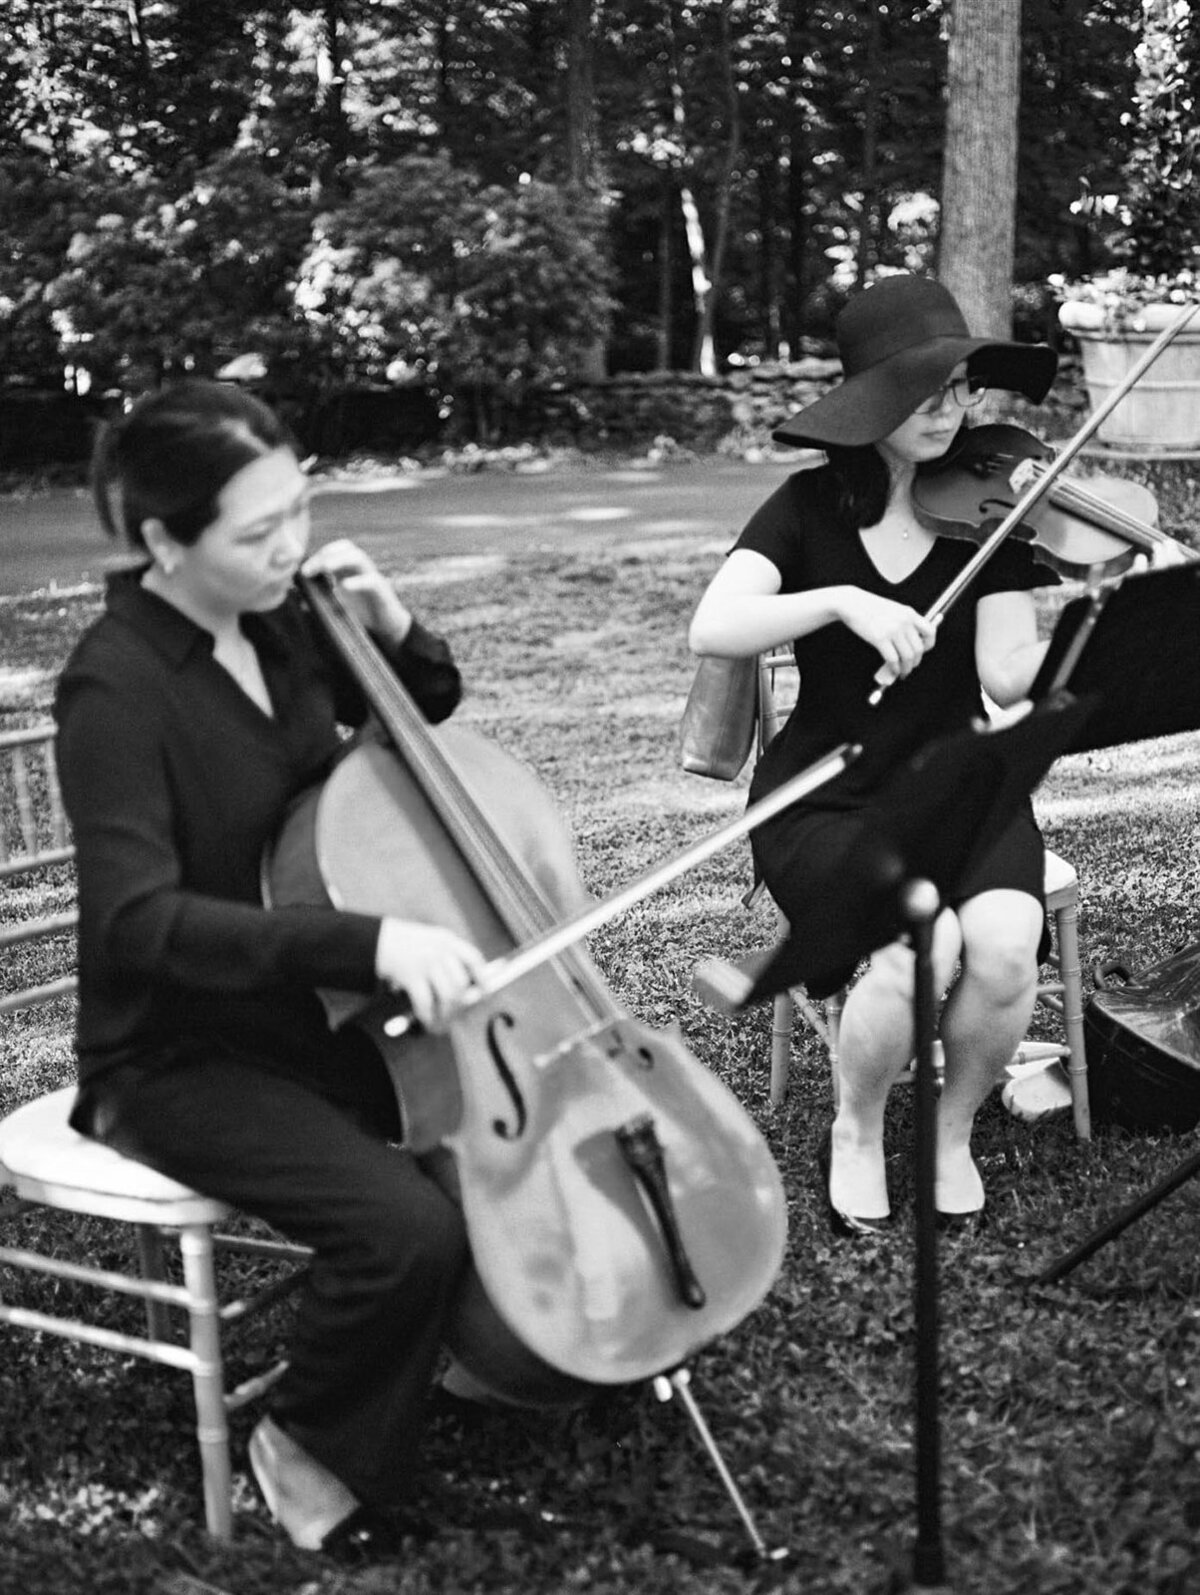 Black and white image of musicians during the ceremony time.